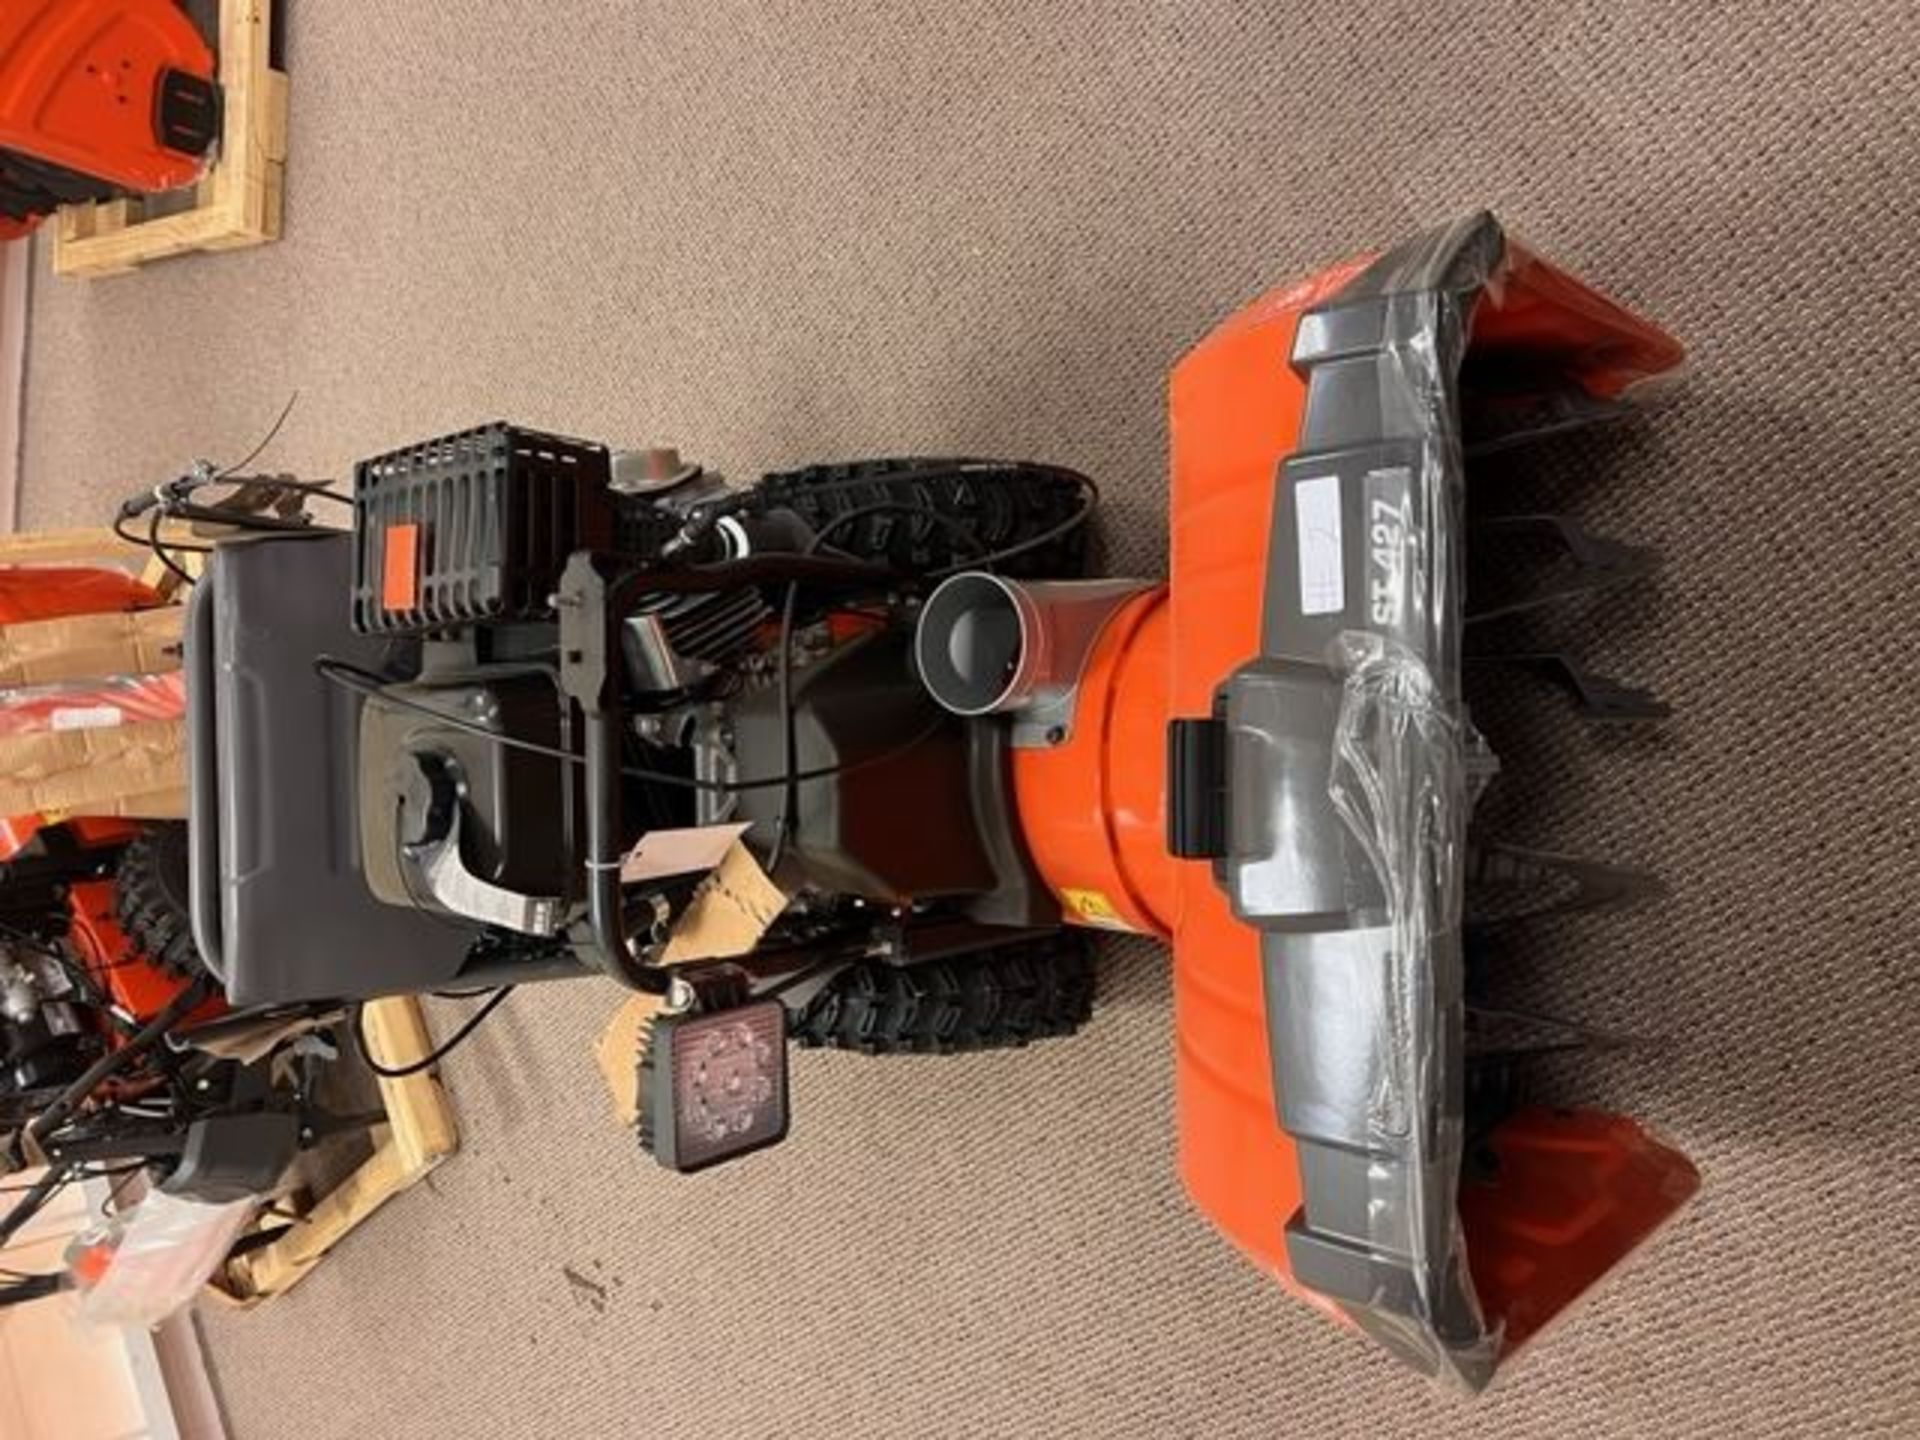 Husqvarna ST 427 Self Propelled Snow Blower - Approx. MSRP $2399 - Image 5 of 5